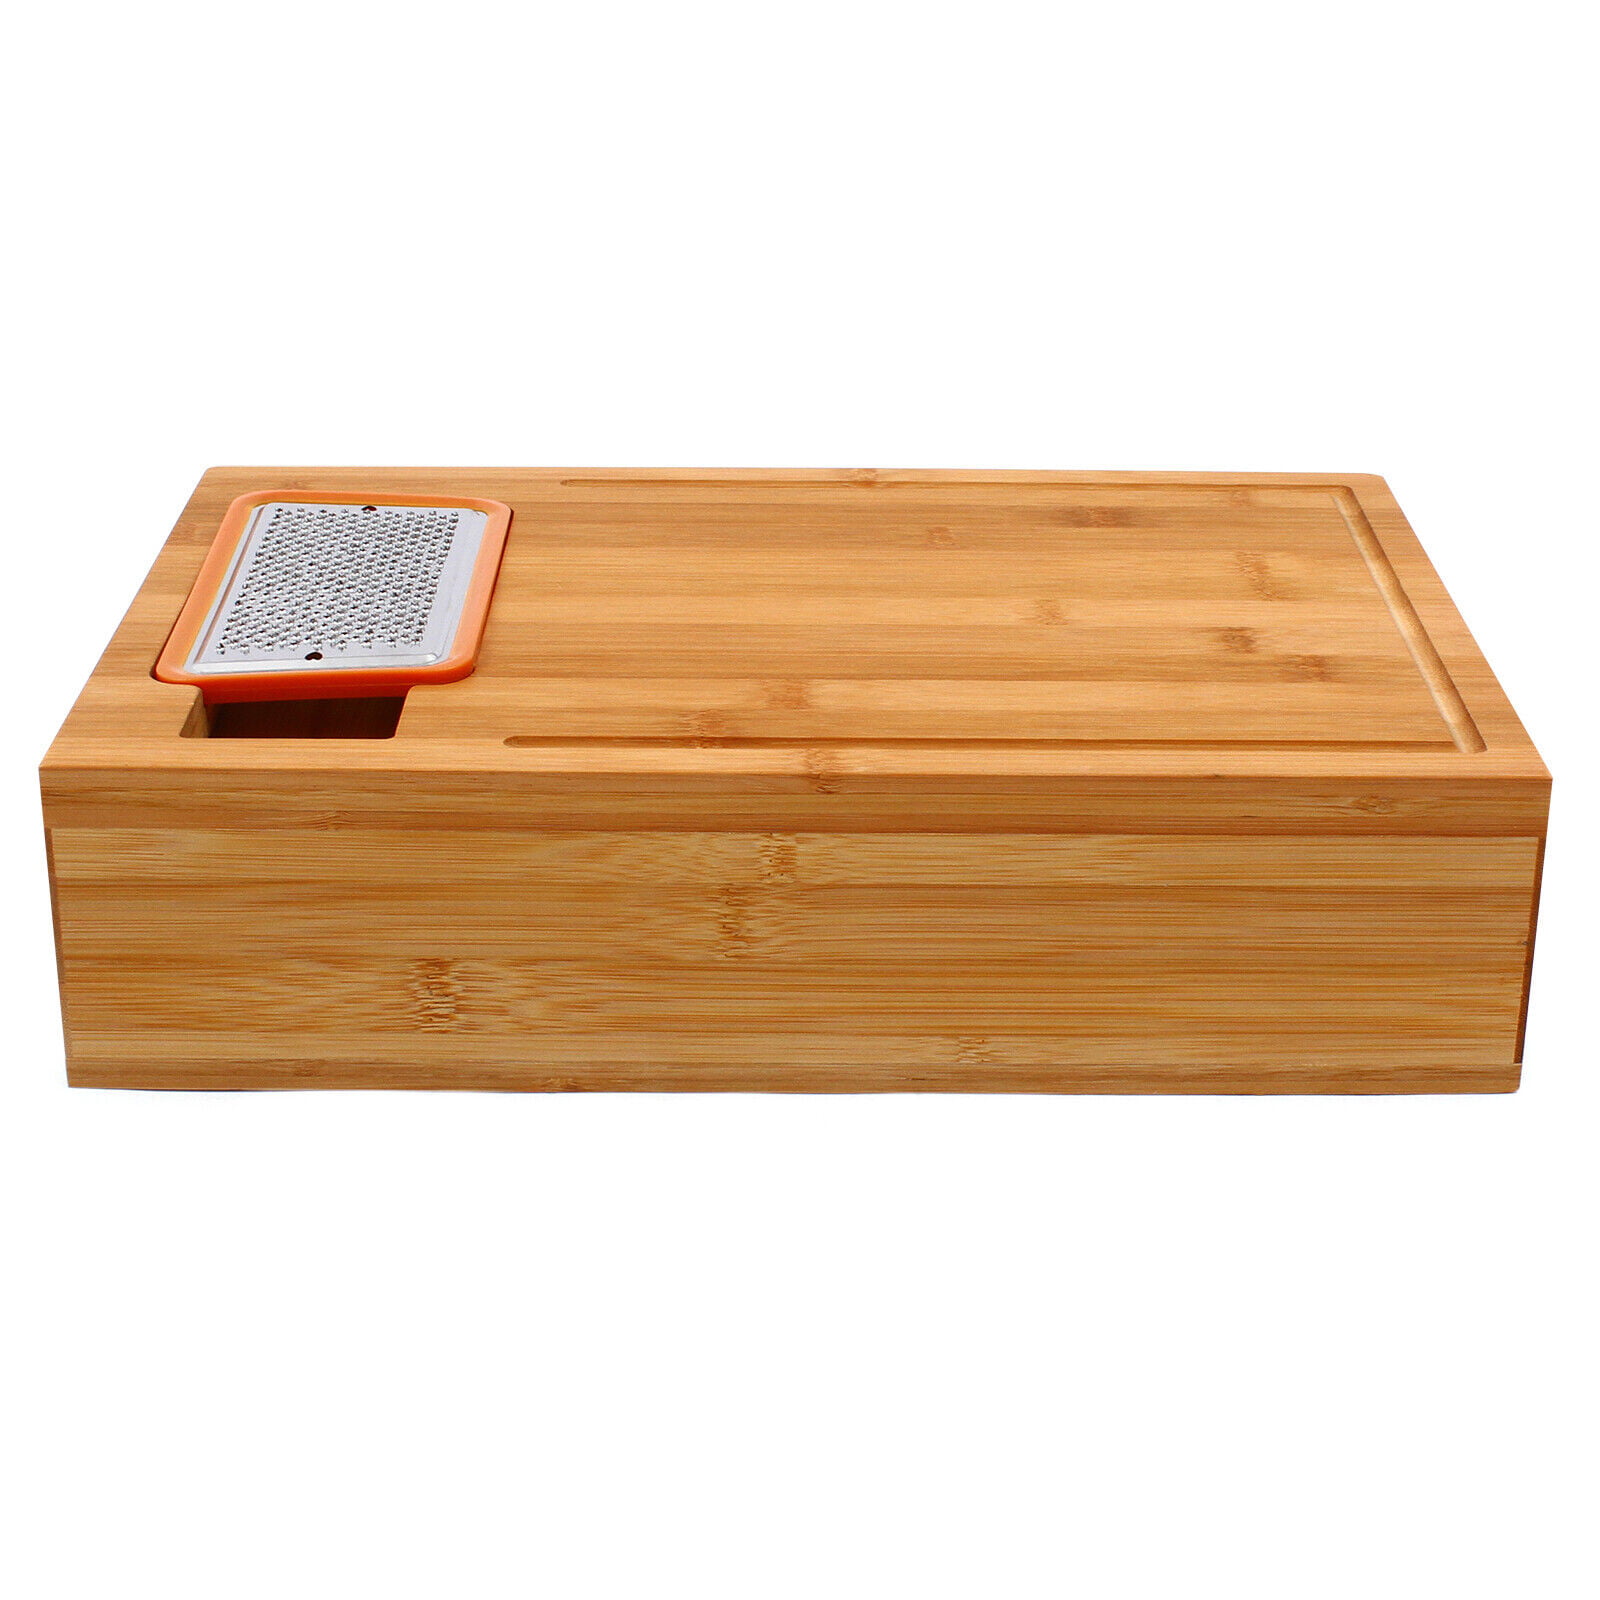 Unibos Bamboo Chopping Board with 4 BPA Free Plastic Drawer/Trays with lids  Kitchen Set-100